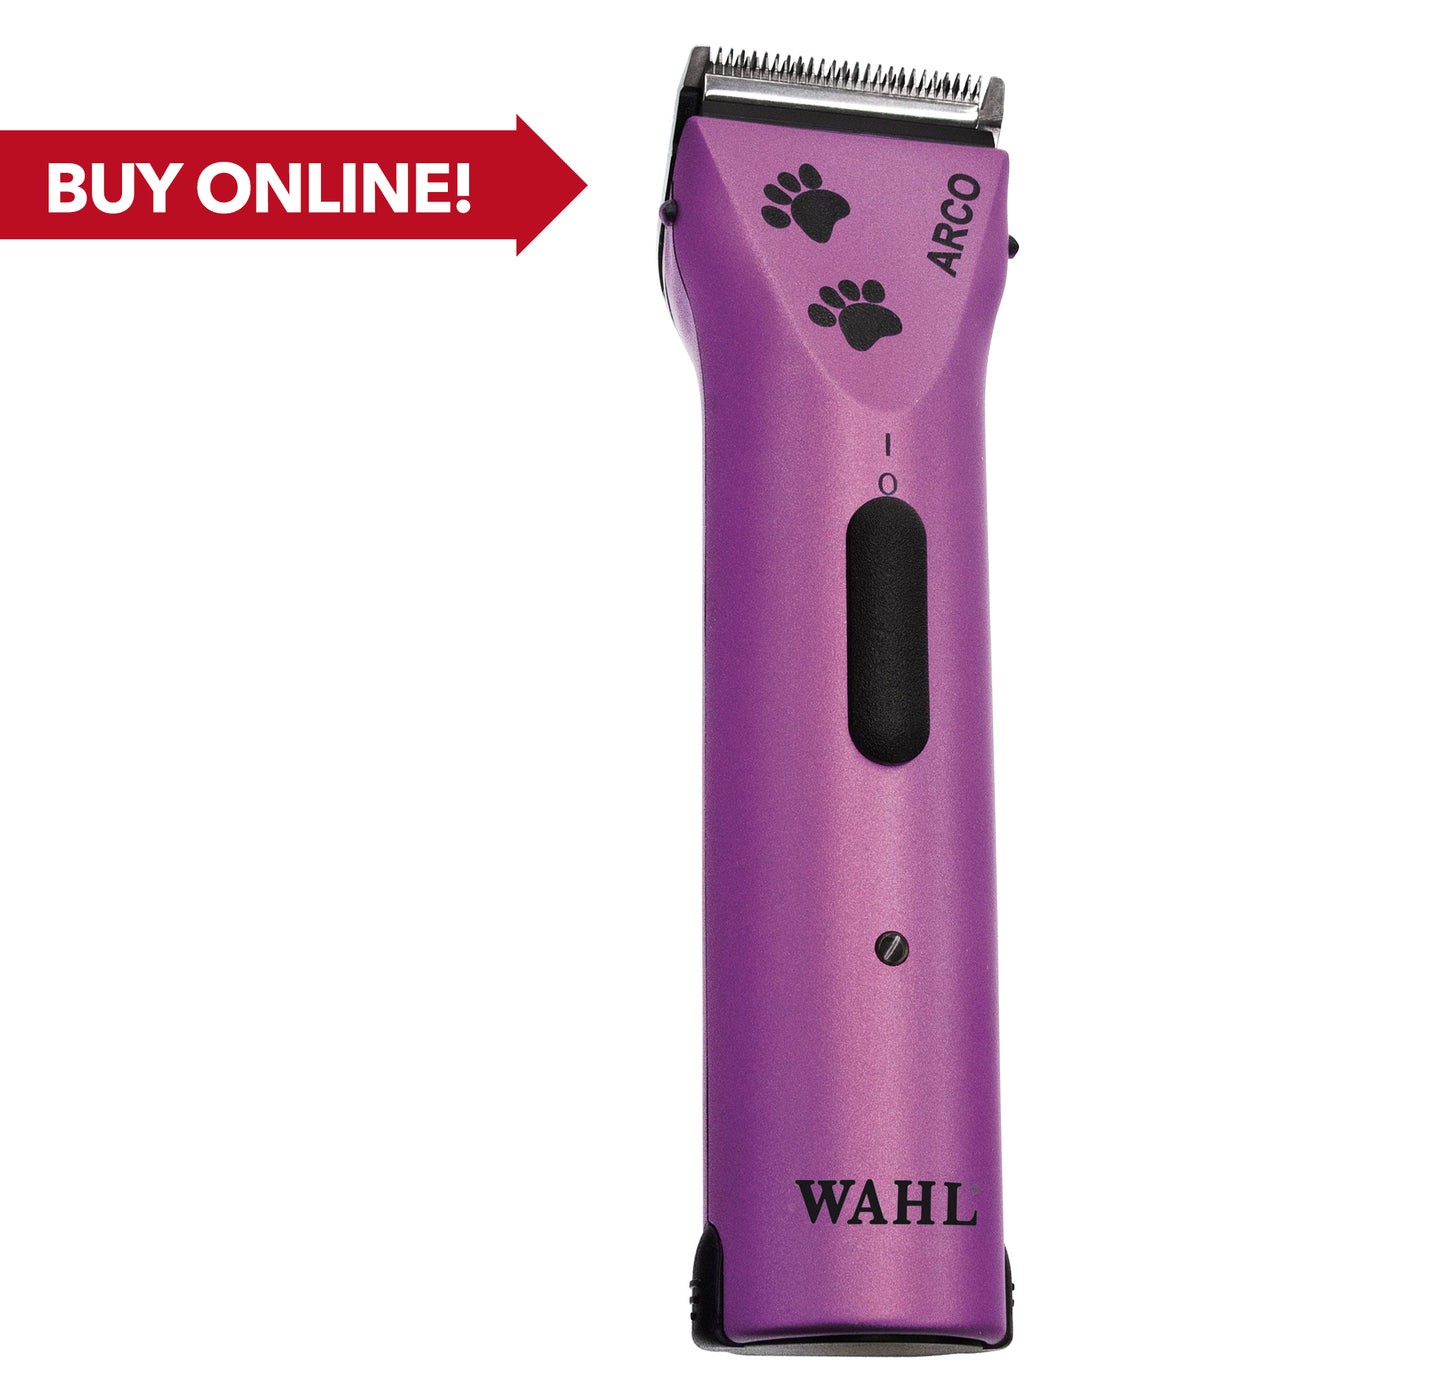 WAHL - Arco SE Cordless Clipper - Purple with Paws